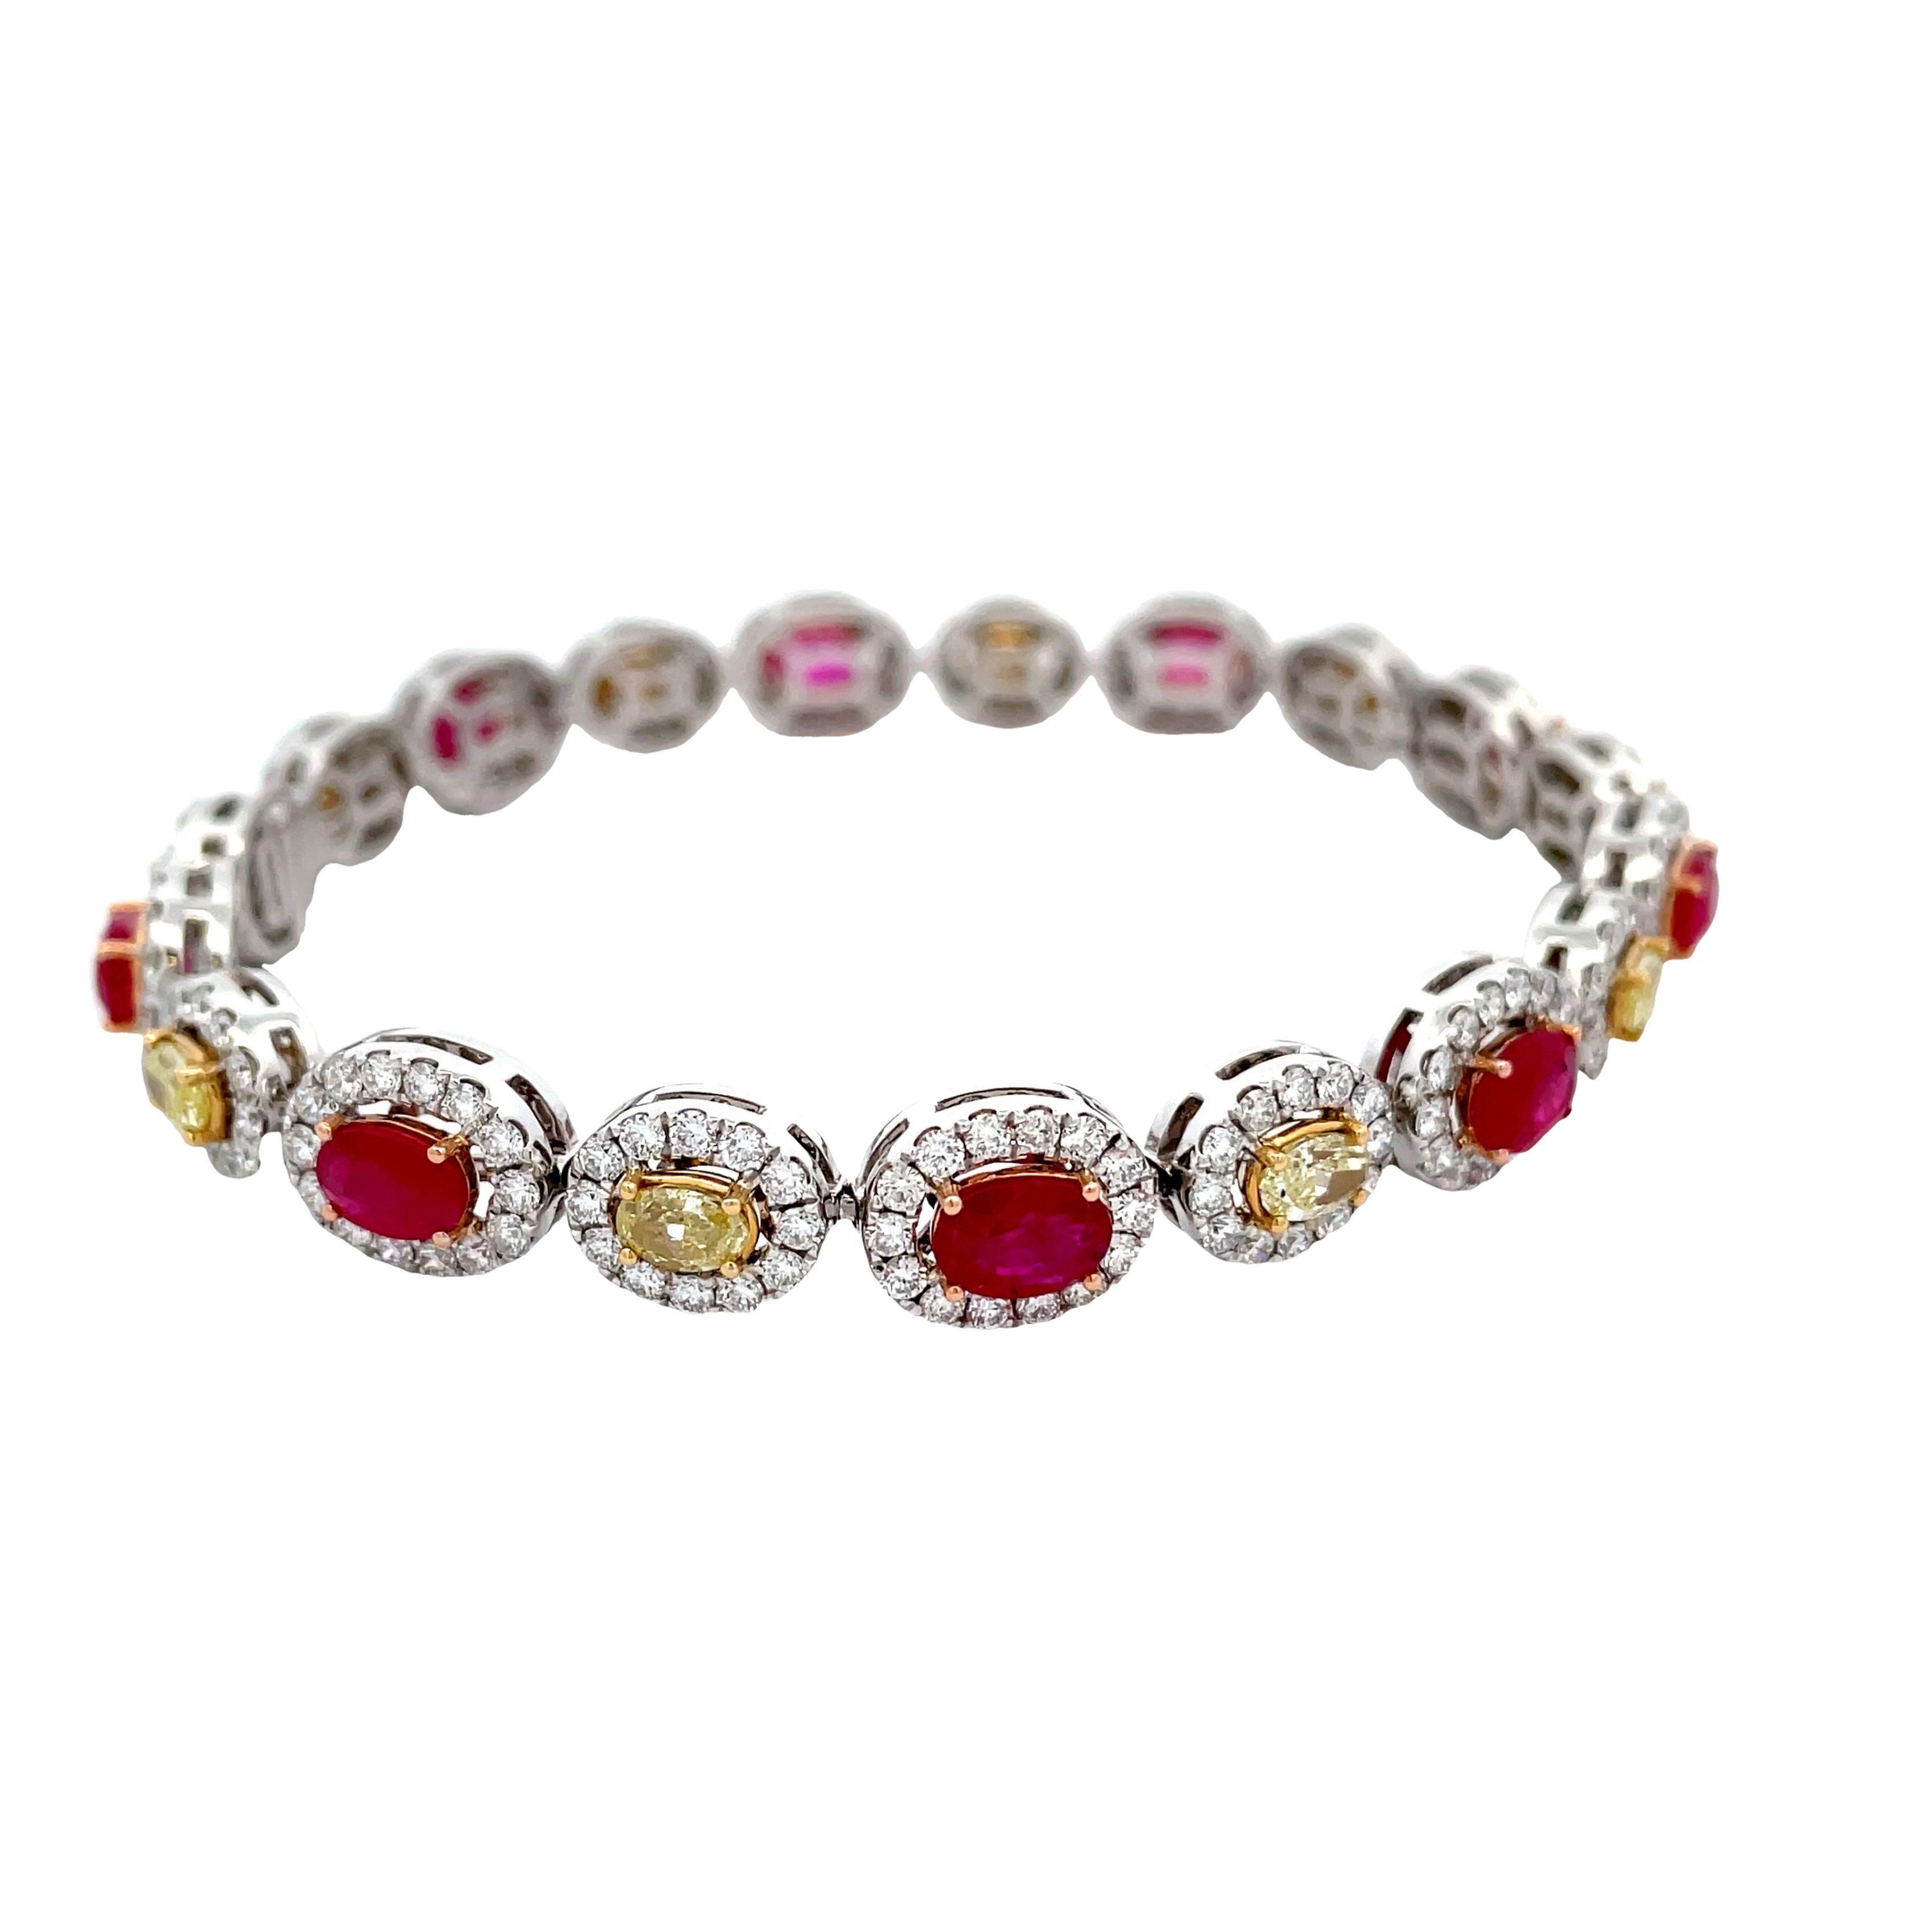 Discover timeless elegance with our 18KR/Y/W Bracelet featuring a captivating mix of gemstones: a 5.08 CT ruby, 3.91 CT white diamonds, and 2.22 CT yellow diamonds, creating a stunning symphony of color and brilliance.